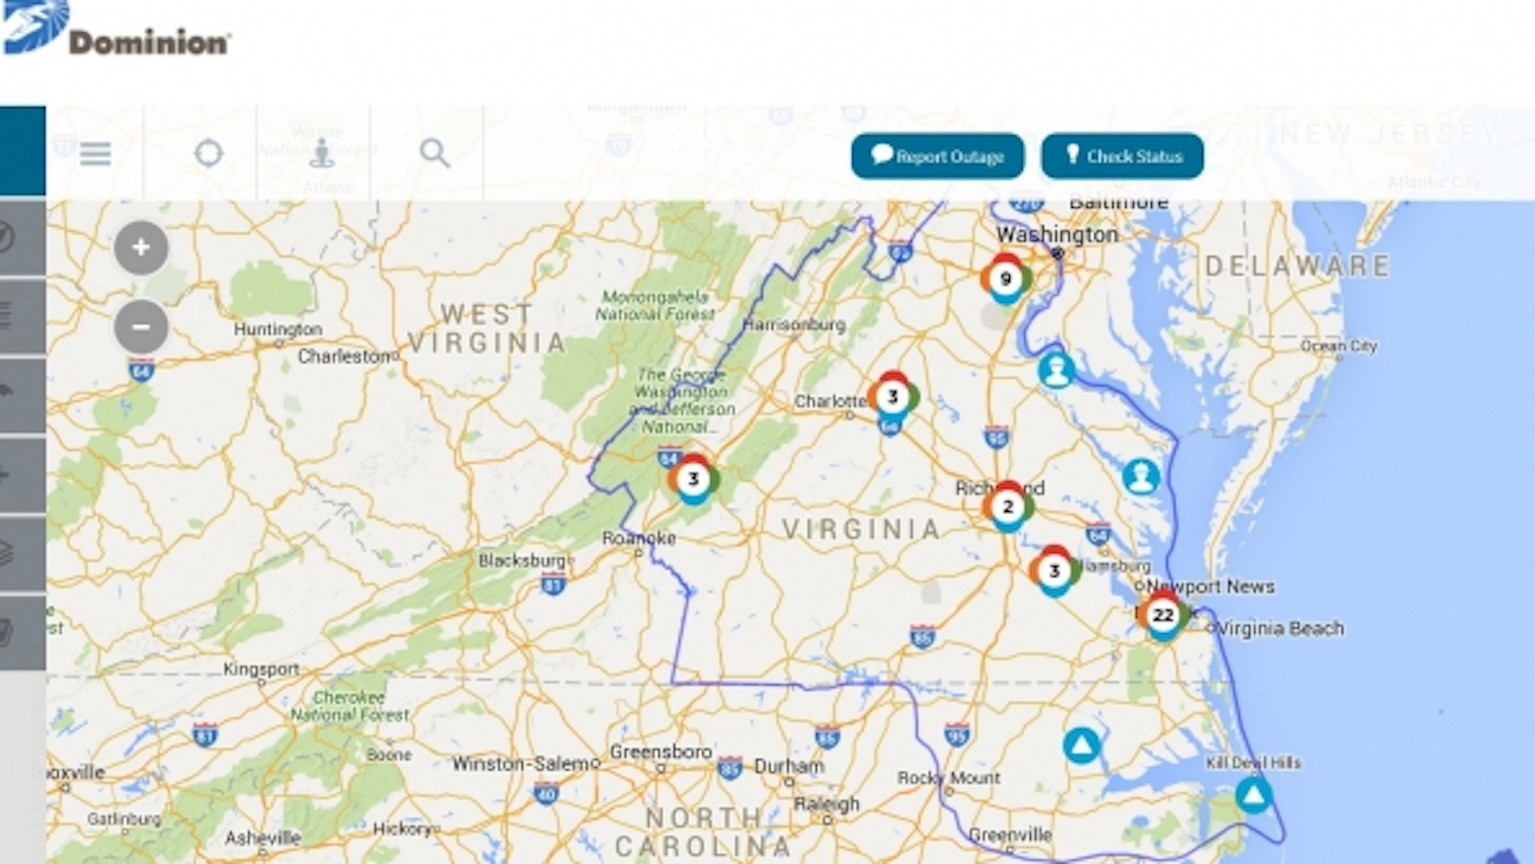 Dominion's New Online Map Makes it Easier to Track Power Outages